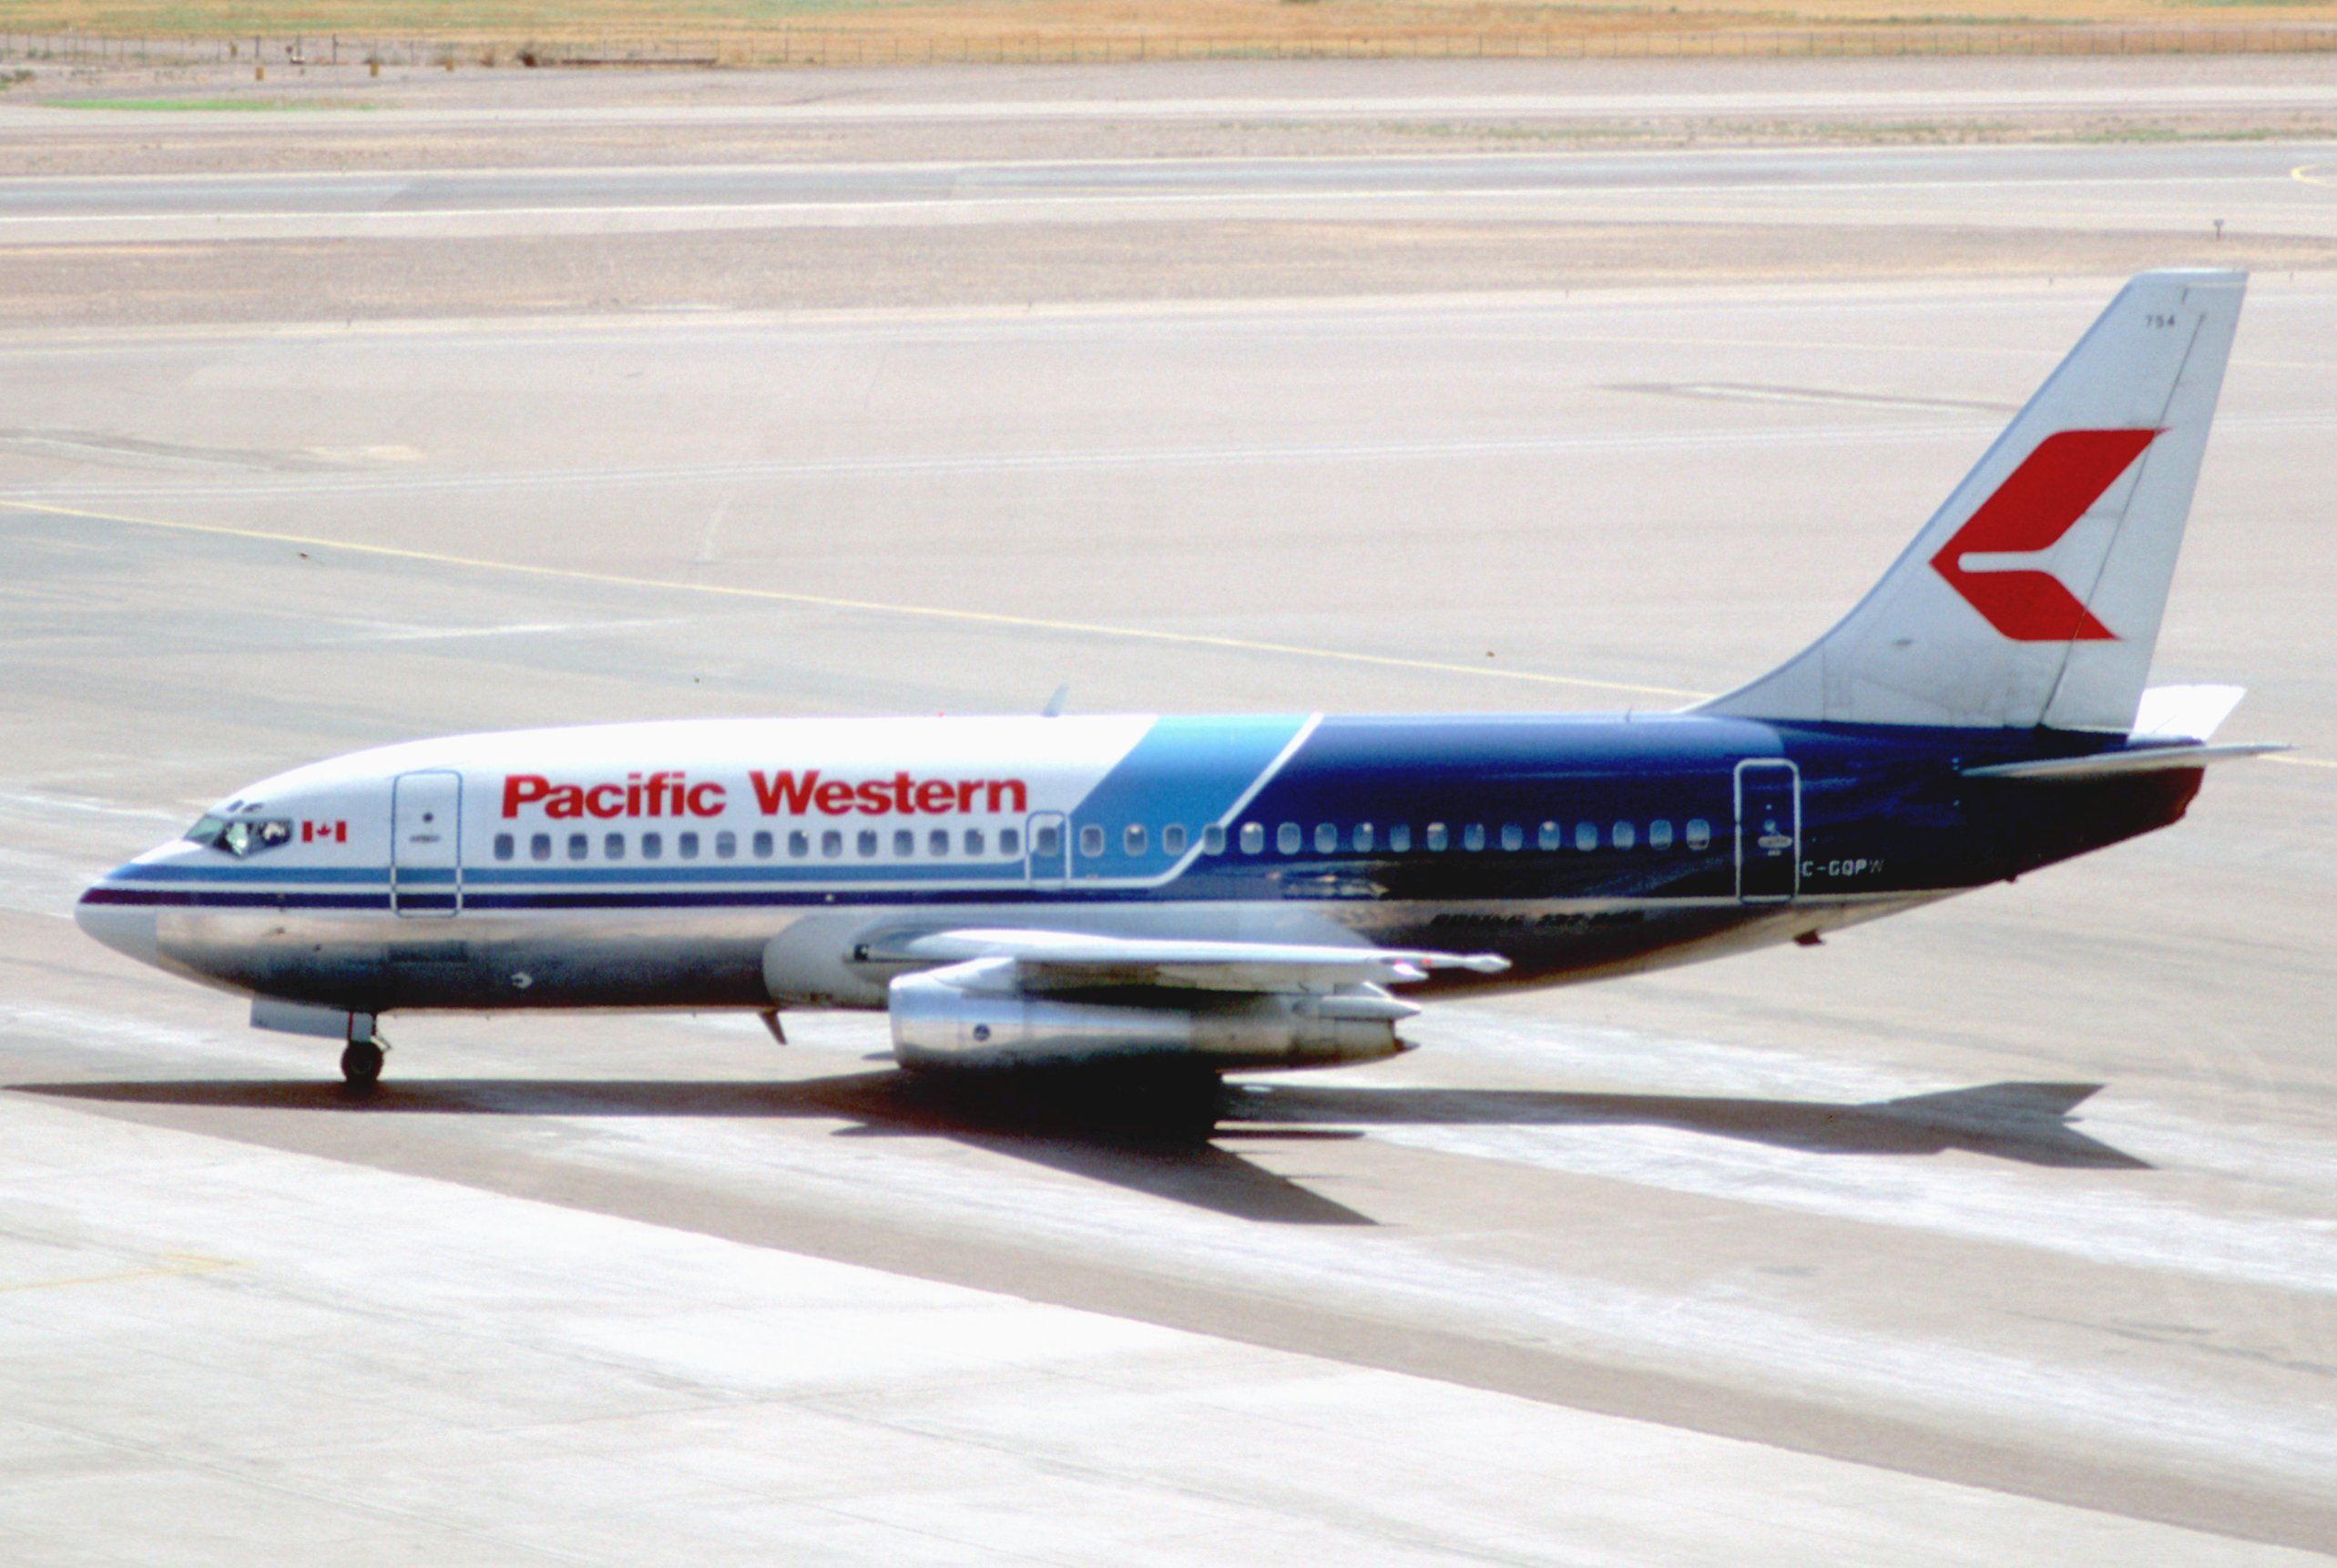 A Pacific Western Airlines Boeing 737-200 on an airport apron.